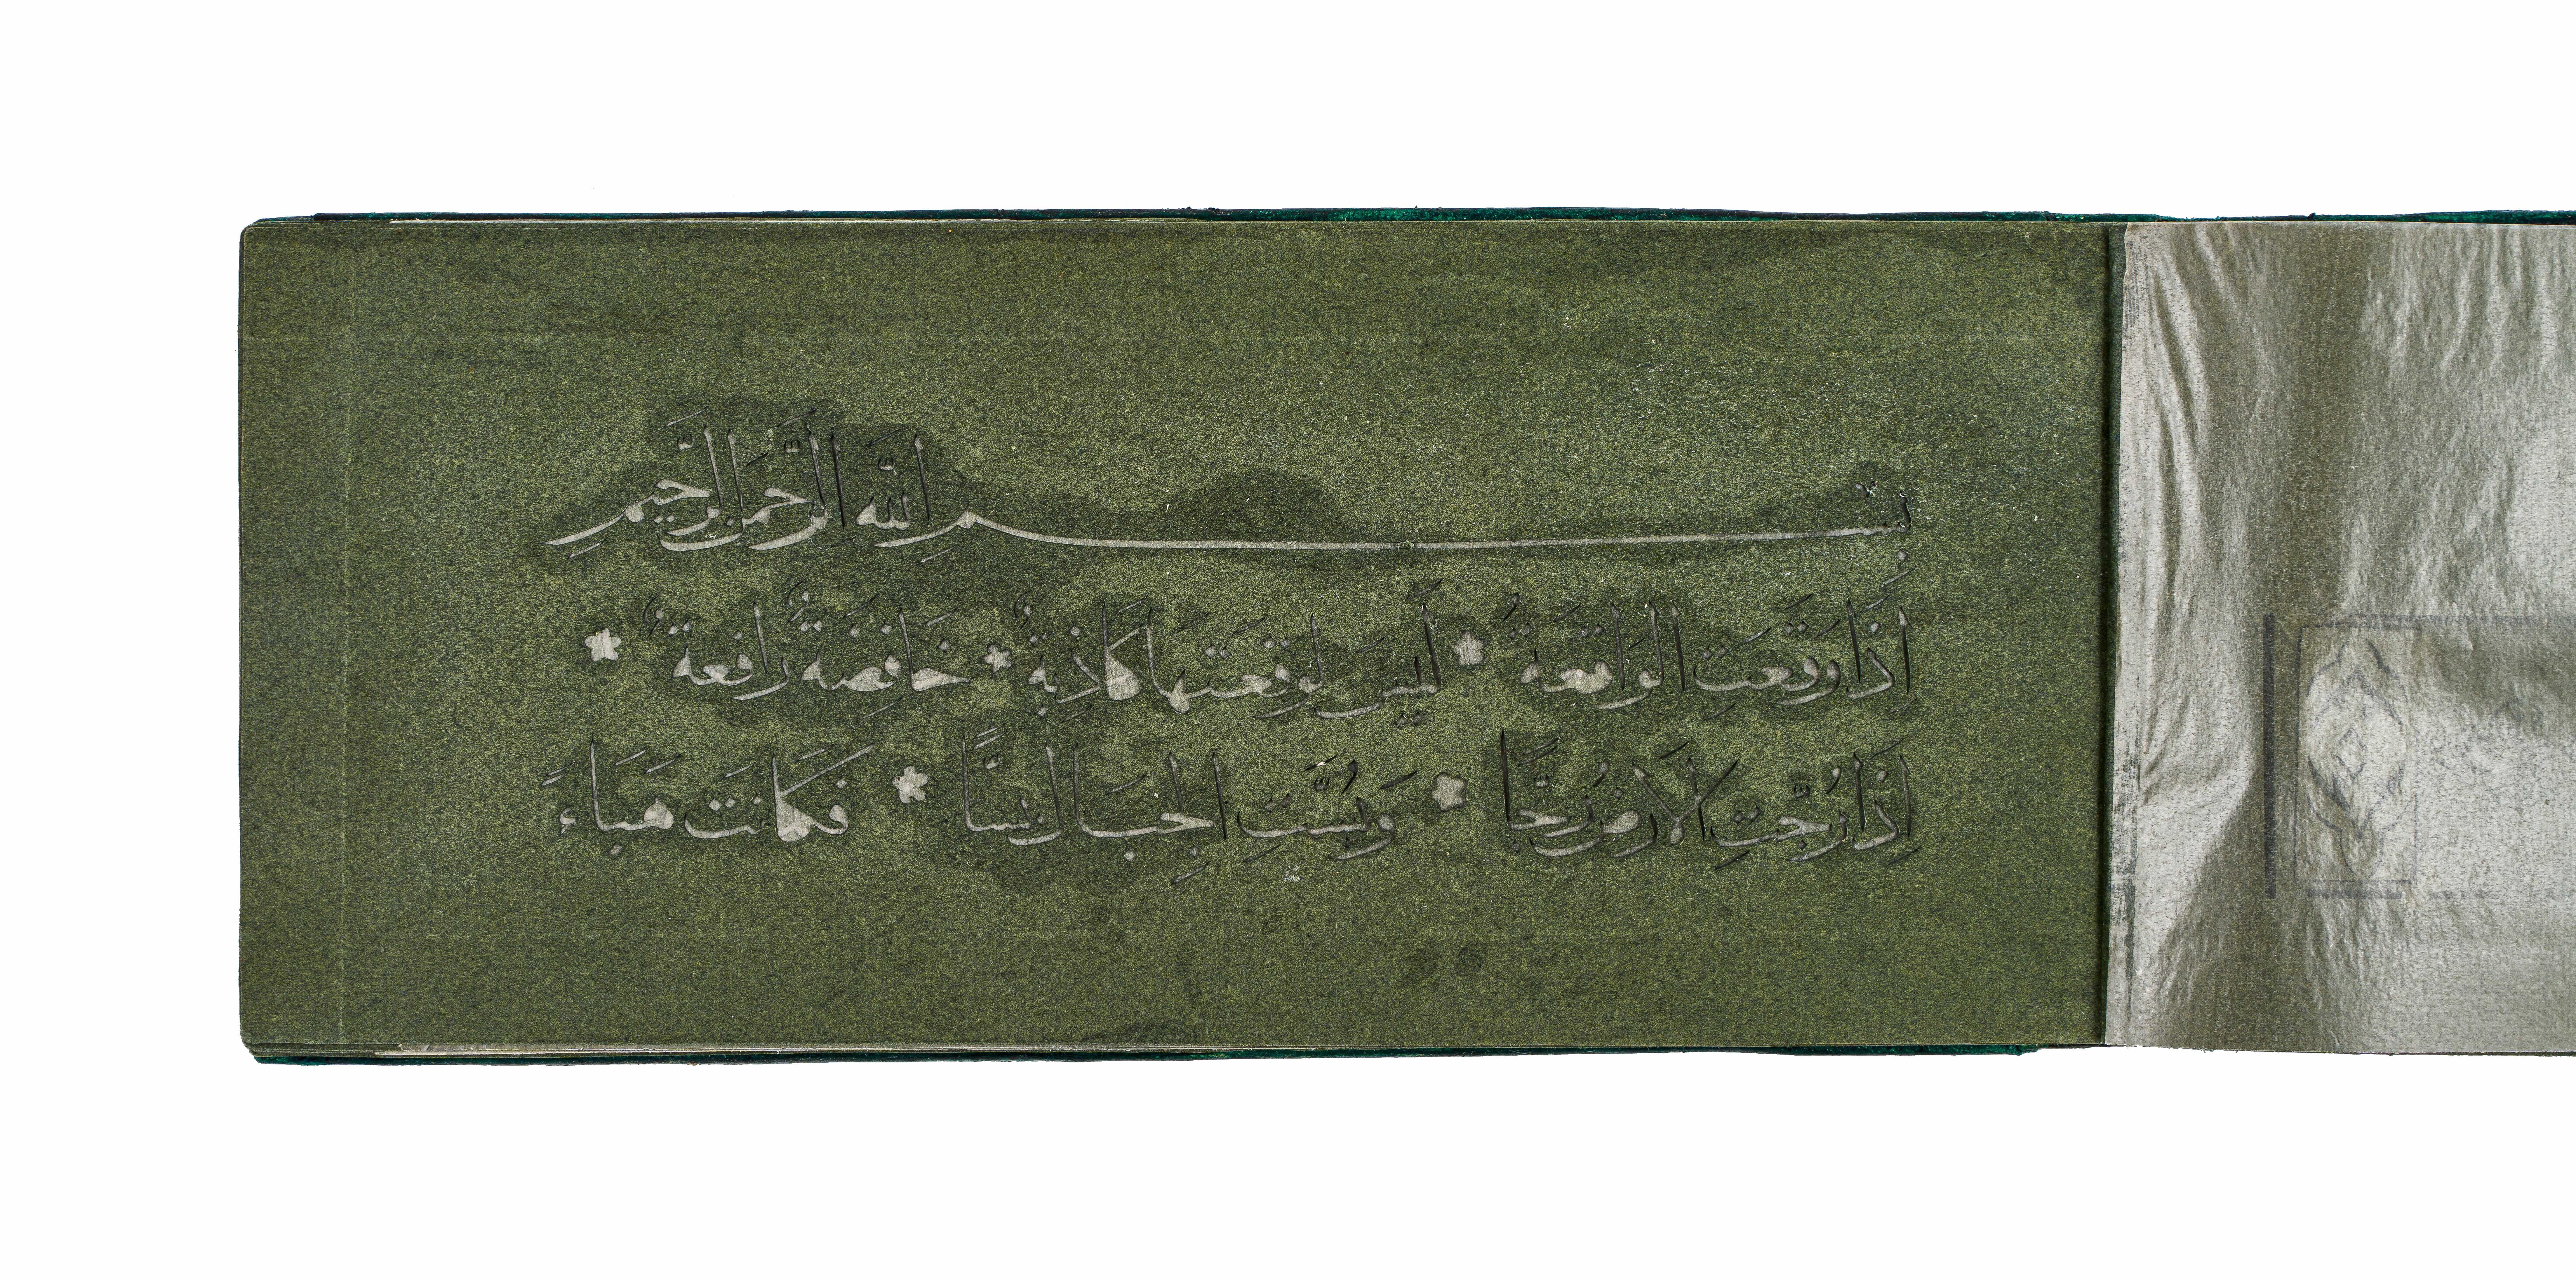 A QURAN SECTION ON GREEN PAPER, INDIA, 20TH CENTURY - Image 3 of 6